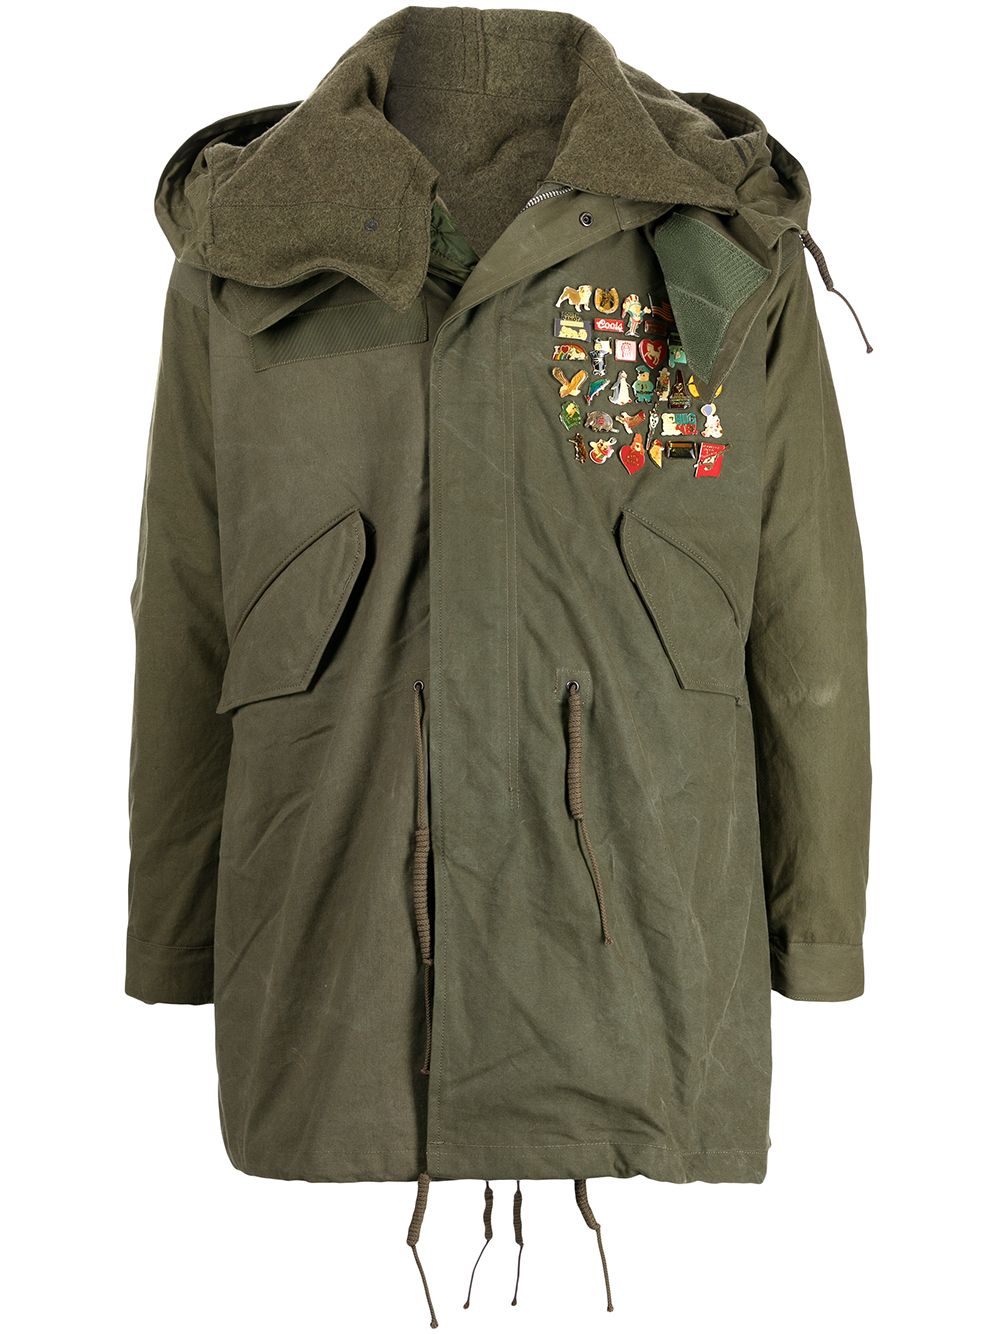 Readymade pin-embellished fishtail parka - Green von Readymade